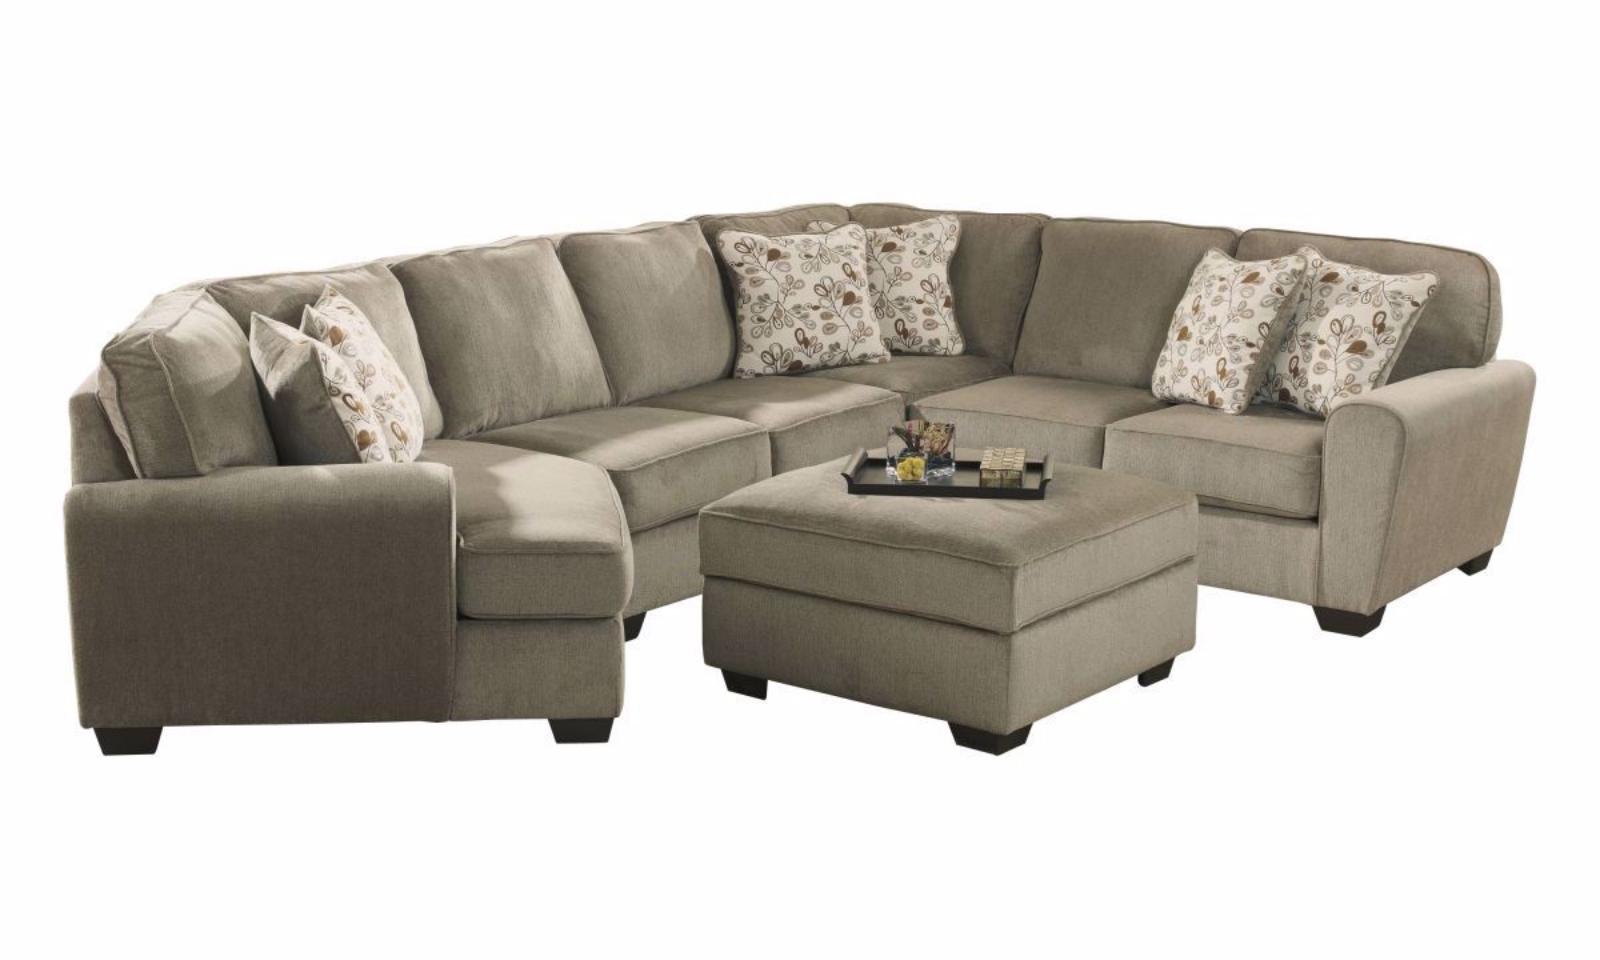 Picture of Patola Park Sectional with Ottoman